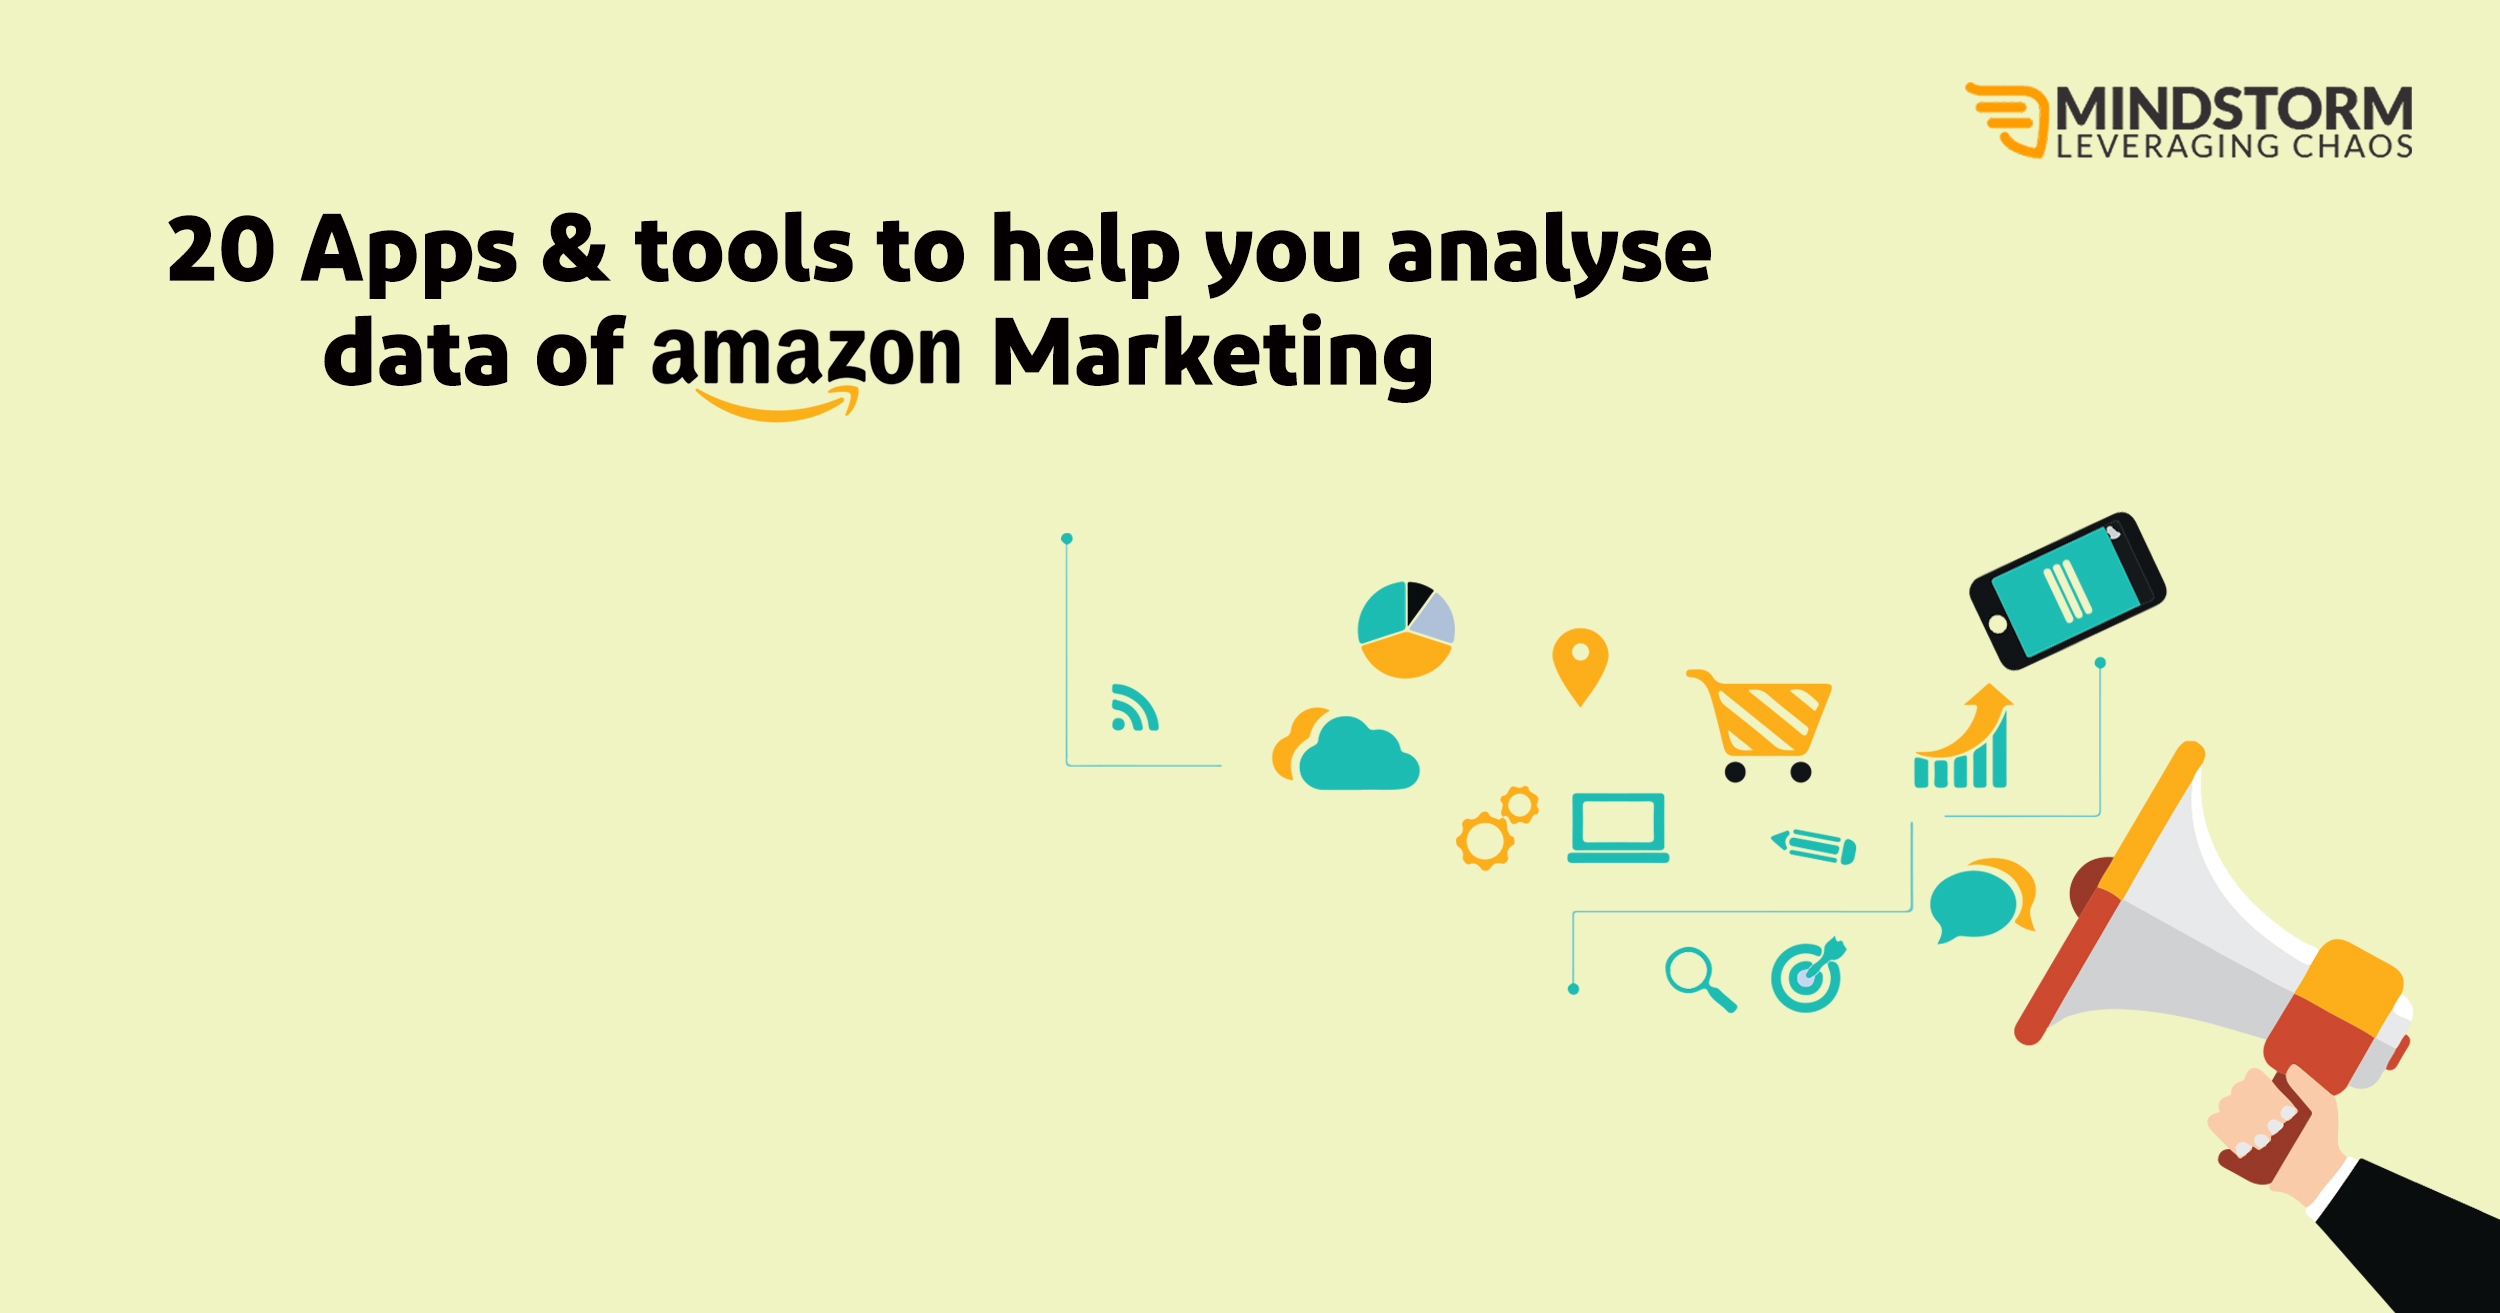 20 Apps and Tools to help you analyze data from Amazon Marketing!